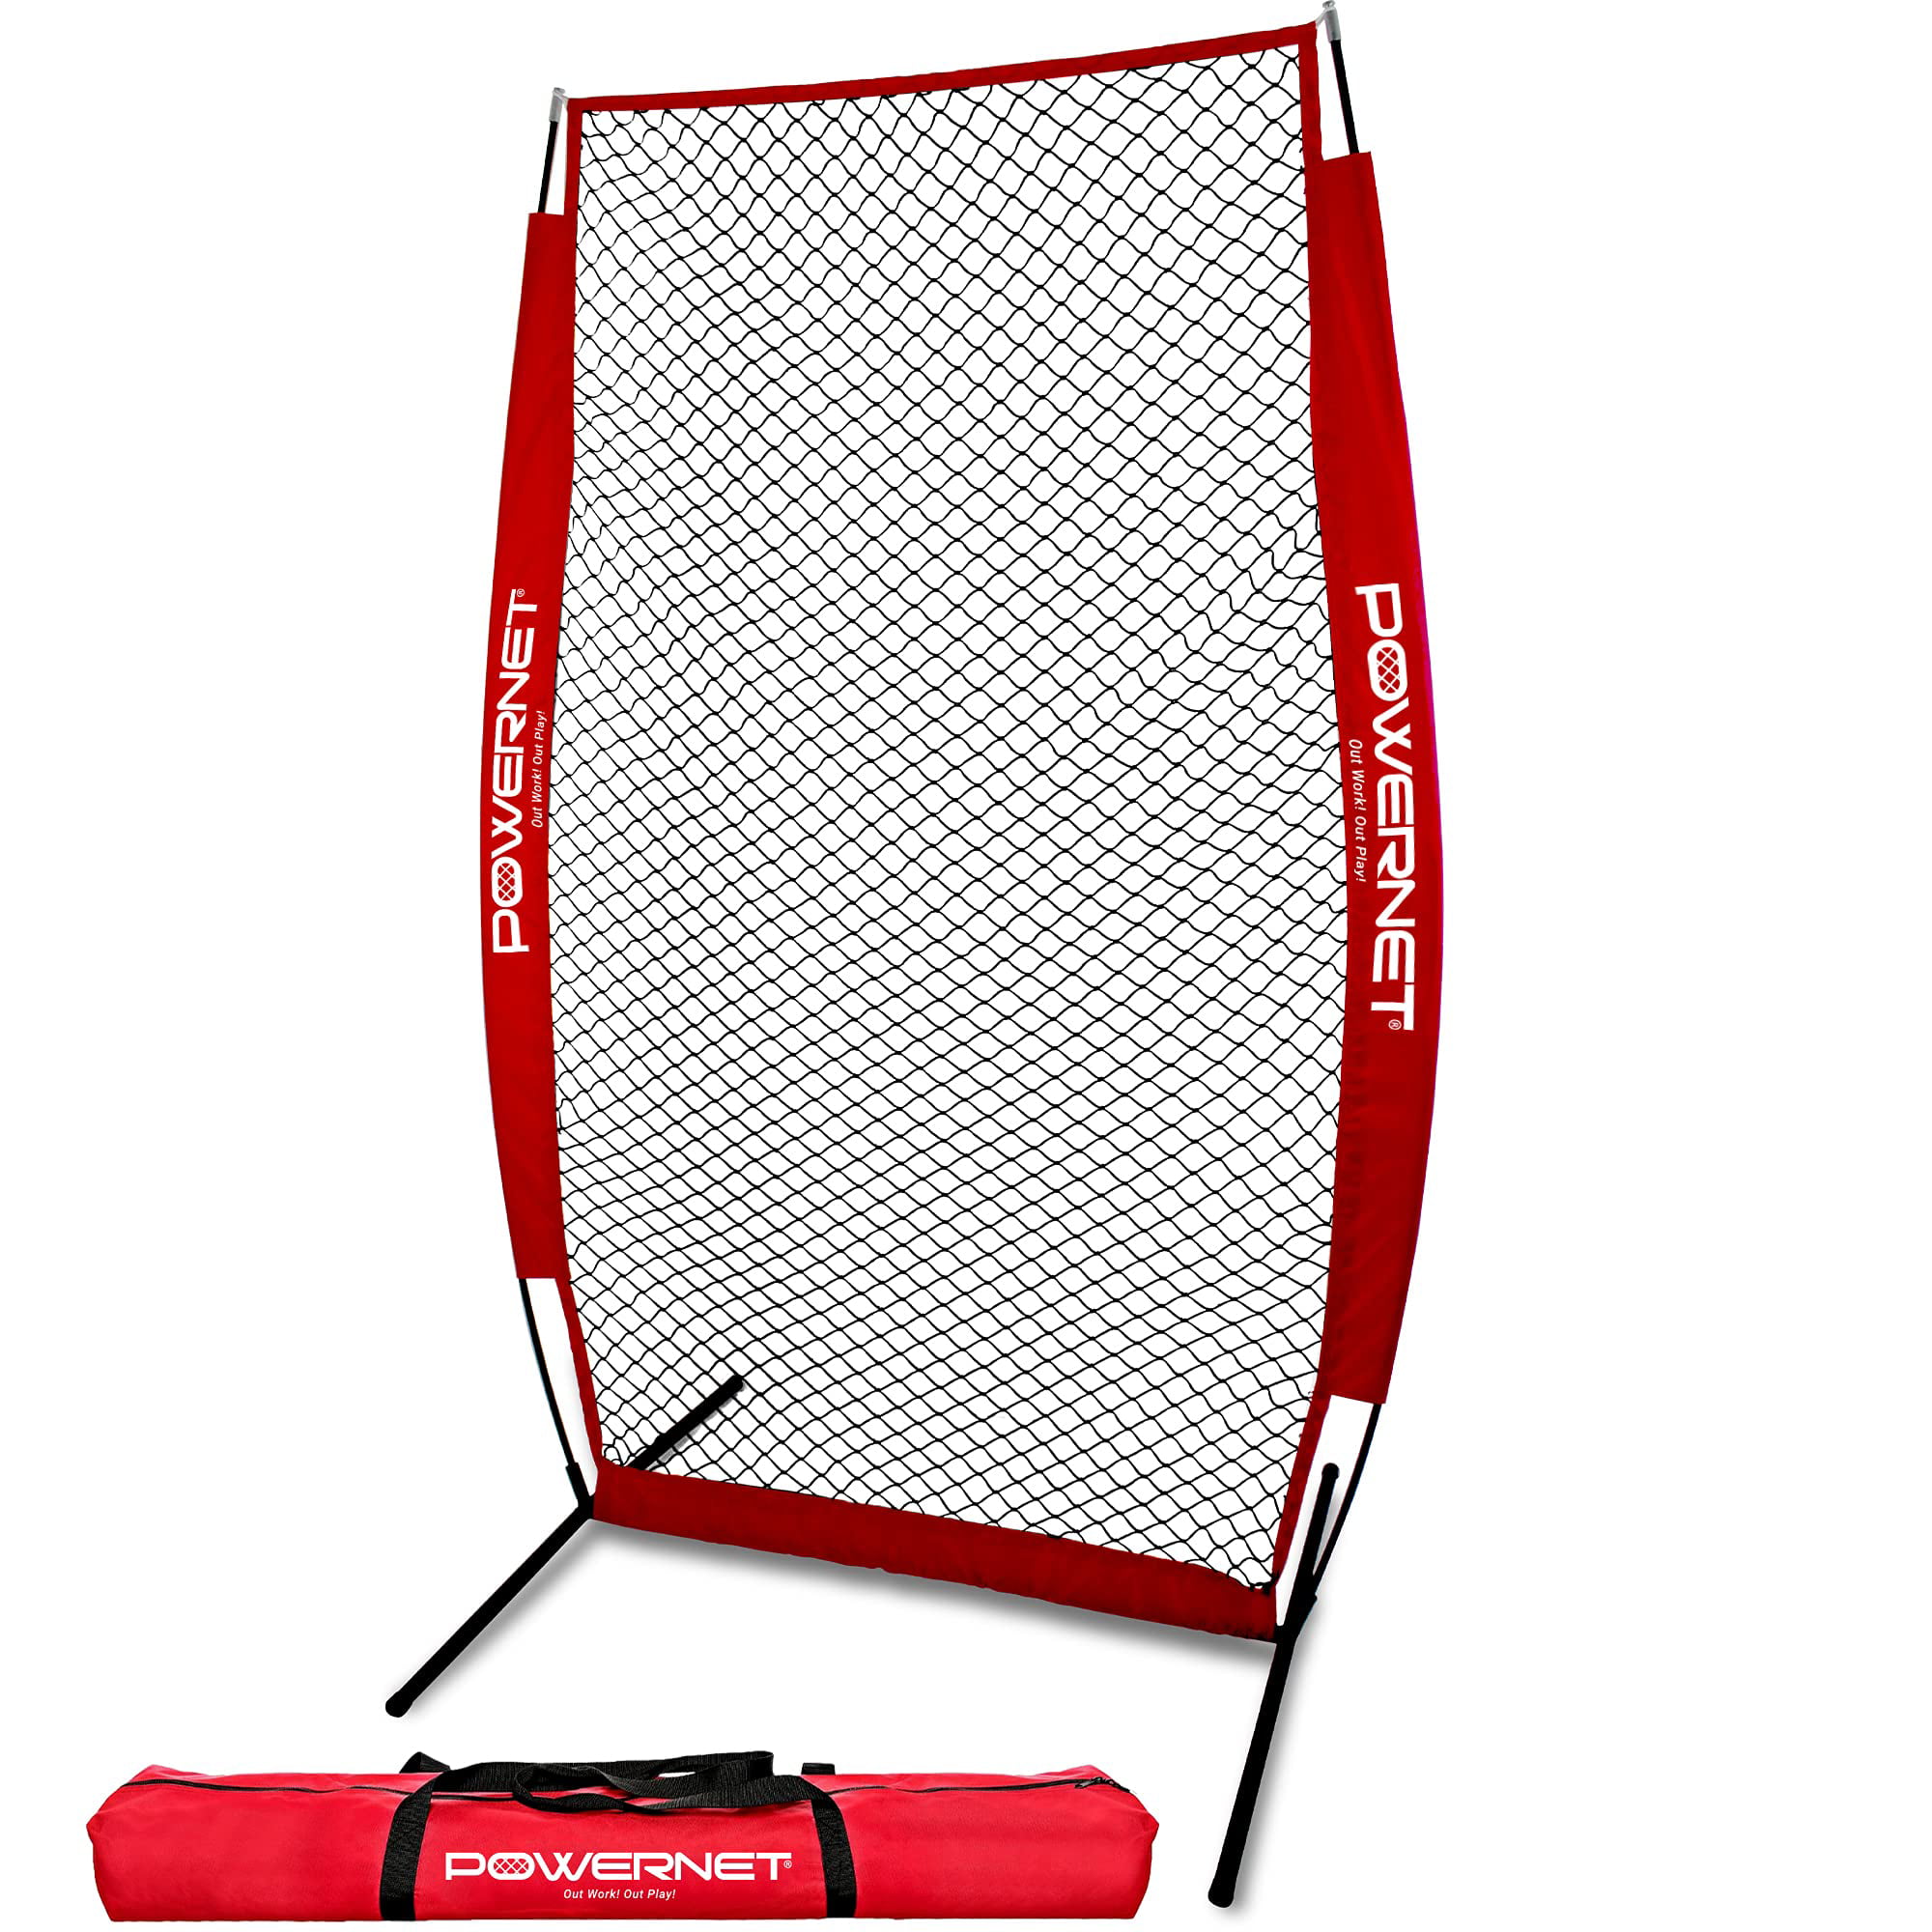 Portable Quick Setup Easy Fold Details about   PowerNet Tennis Soccer 18x3 Net Carrying Bag 